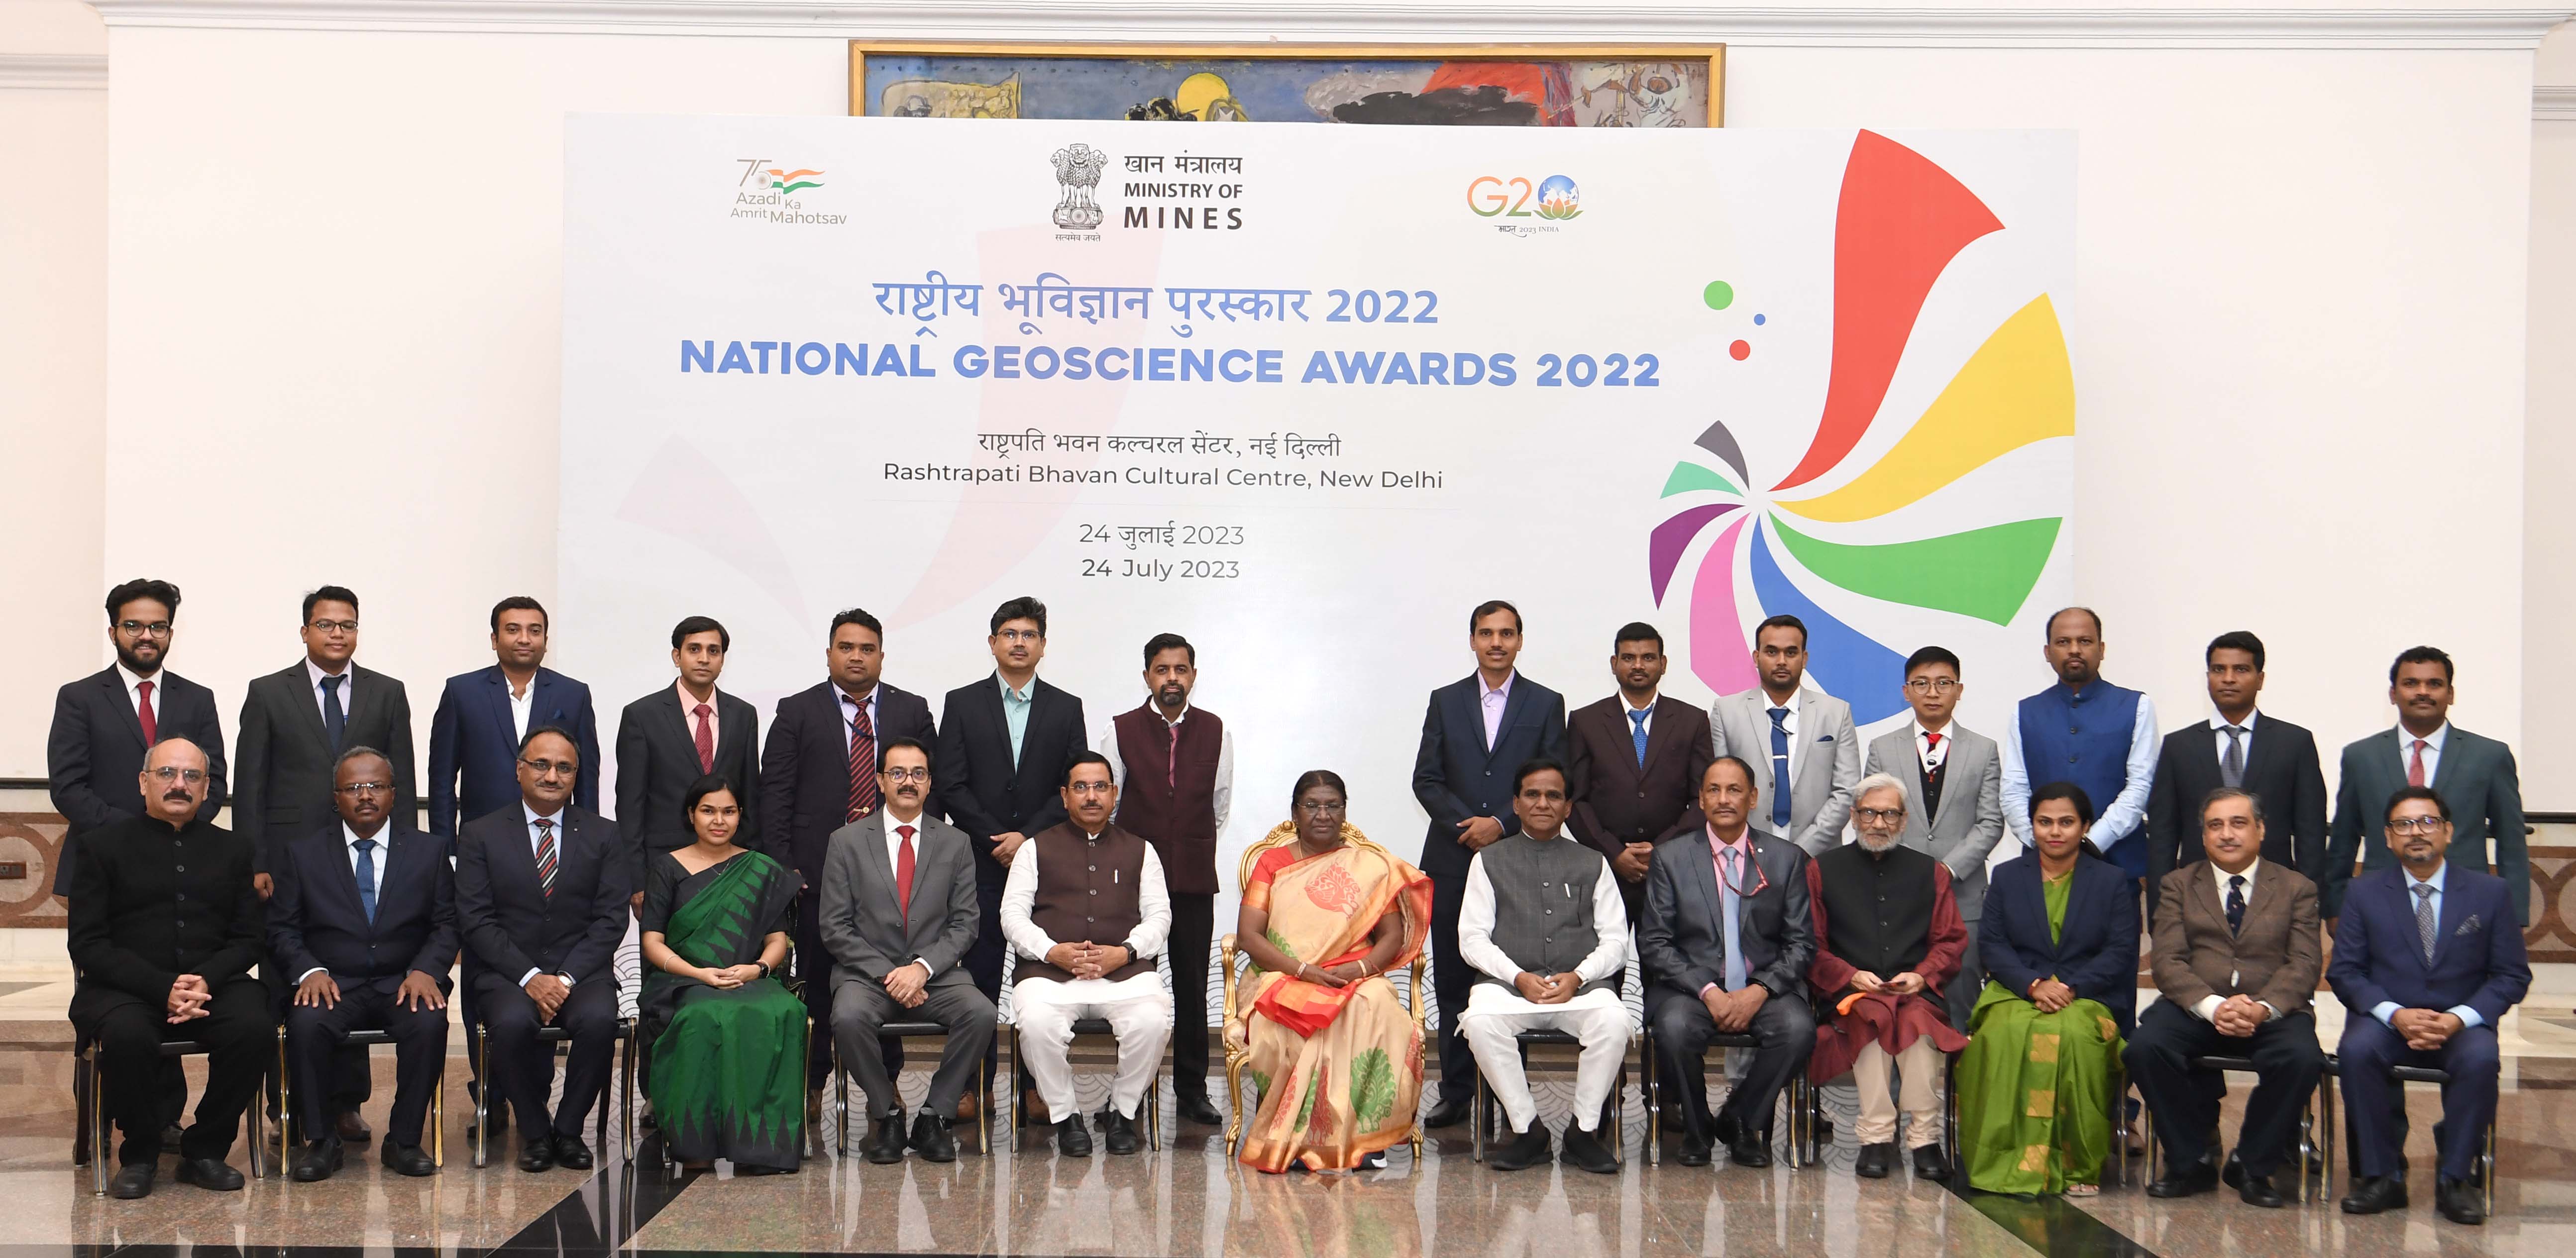 The President of India, Smt Droupadi Murmu presented the National Geoscience Awards-2022 at a ceremony held at Rashtrapati Bhavan Cultural Centre on July 24, 2023. 